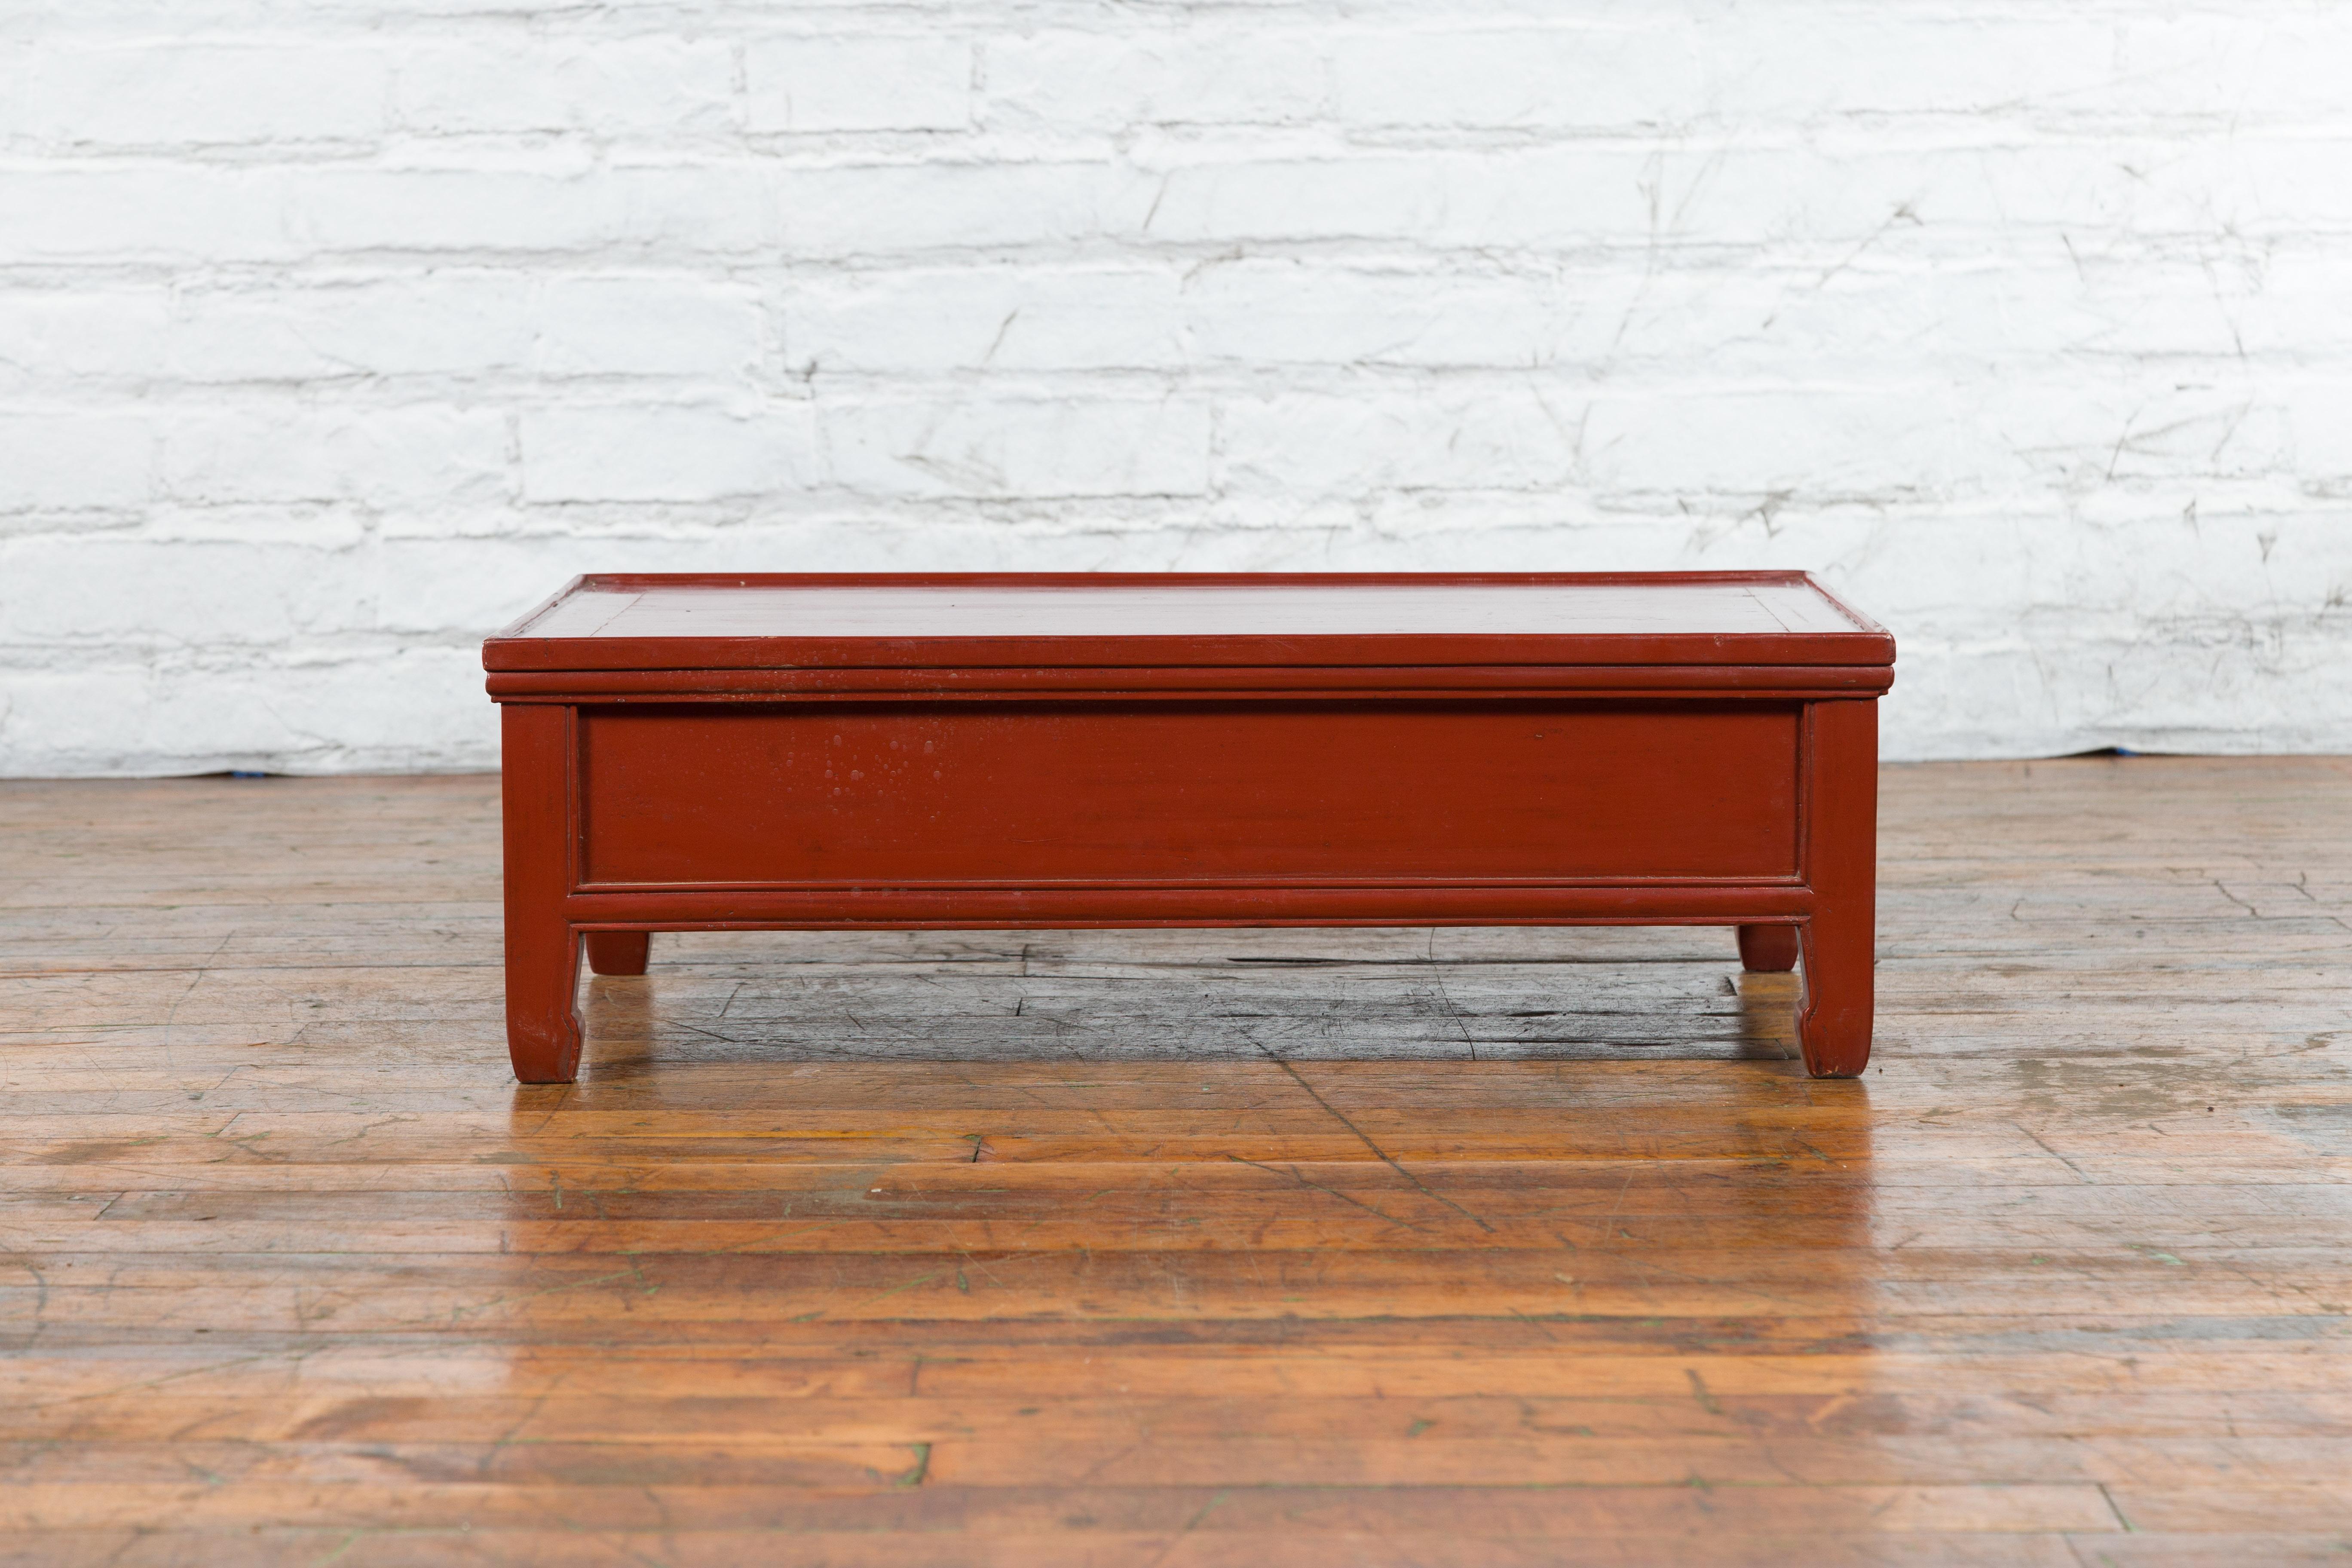 Qing Dynasty Red Lacquer Low Kang Coffee Table with Drawers and Horse Hoof Feet For Sale 4